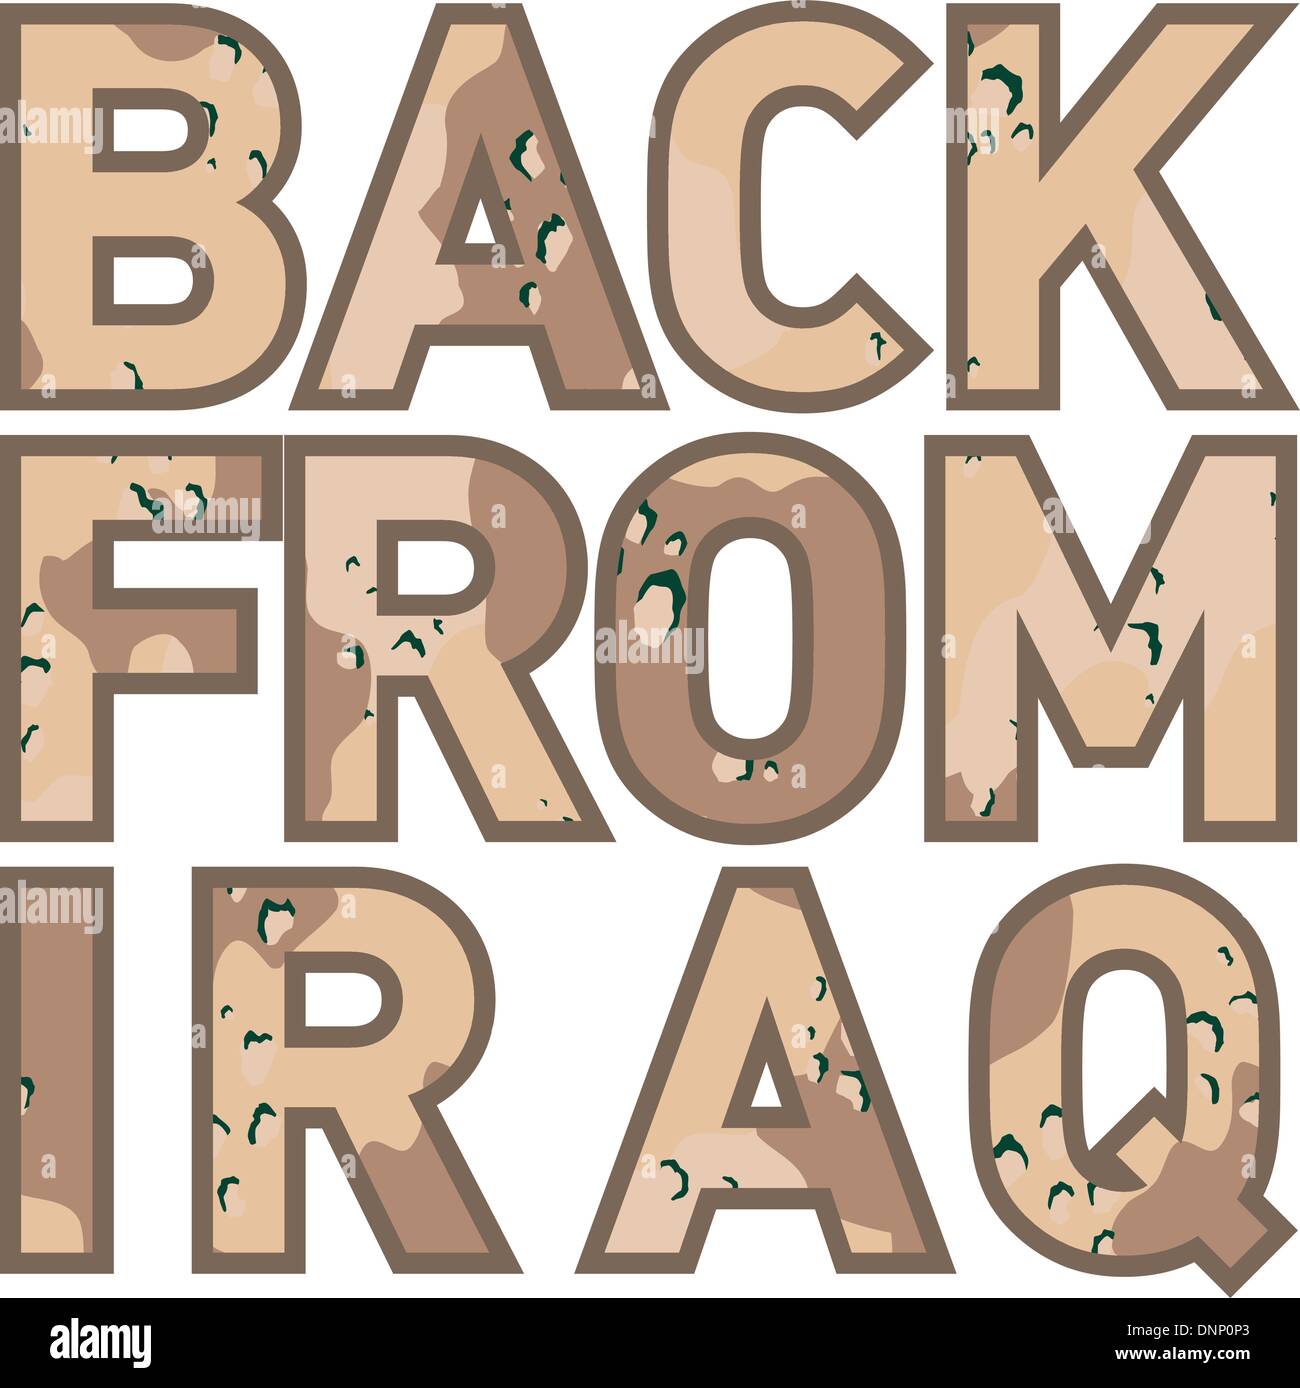 graphic design of text showing 'Back from Iraq' in camouflage color isolated on white Stock Vector